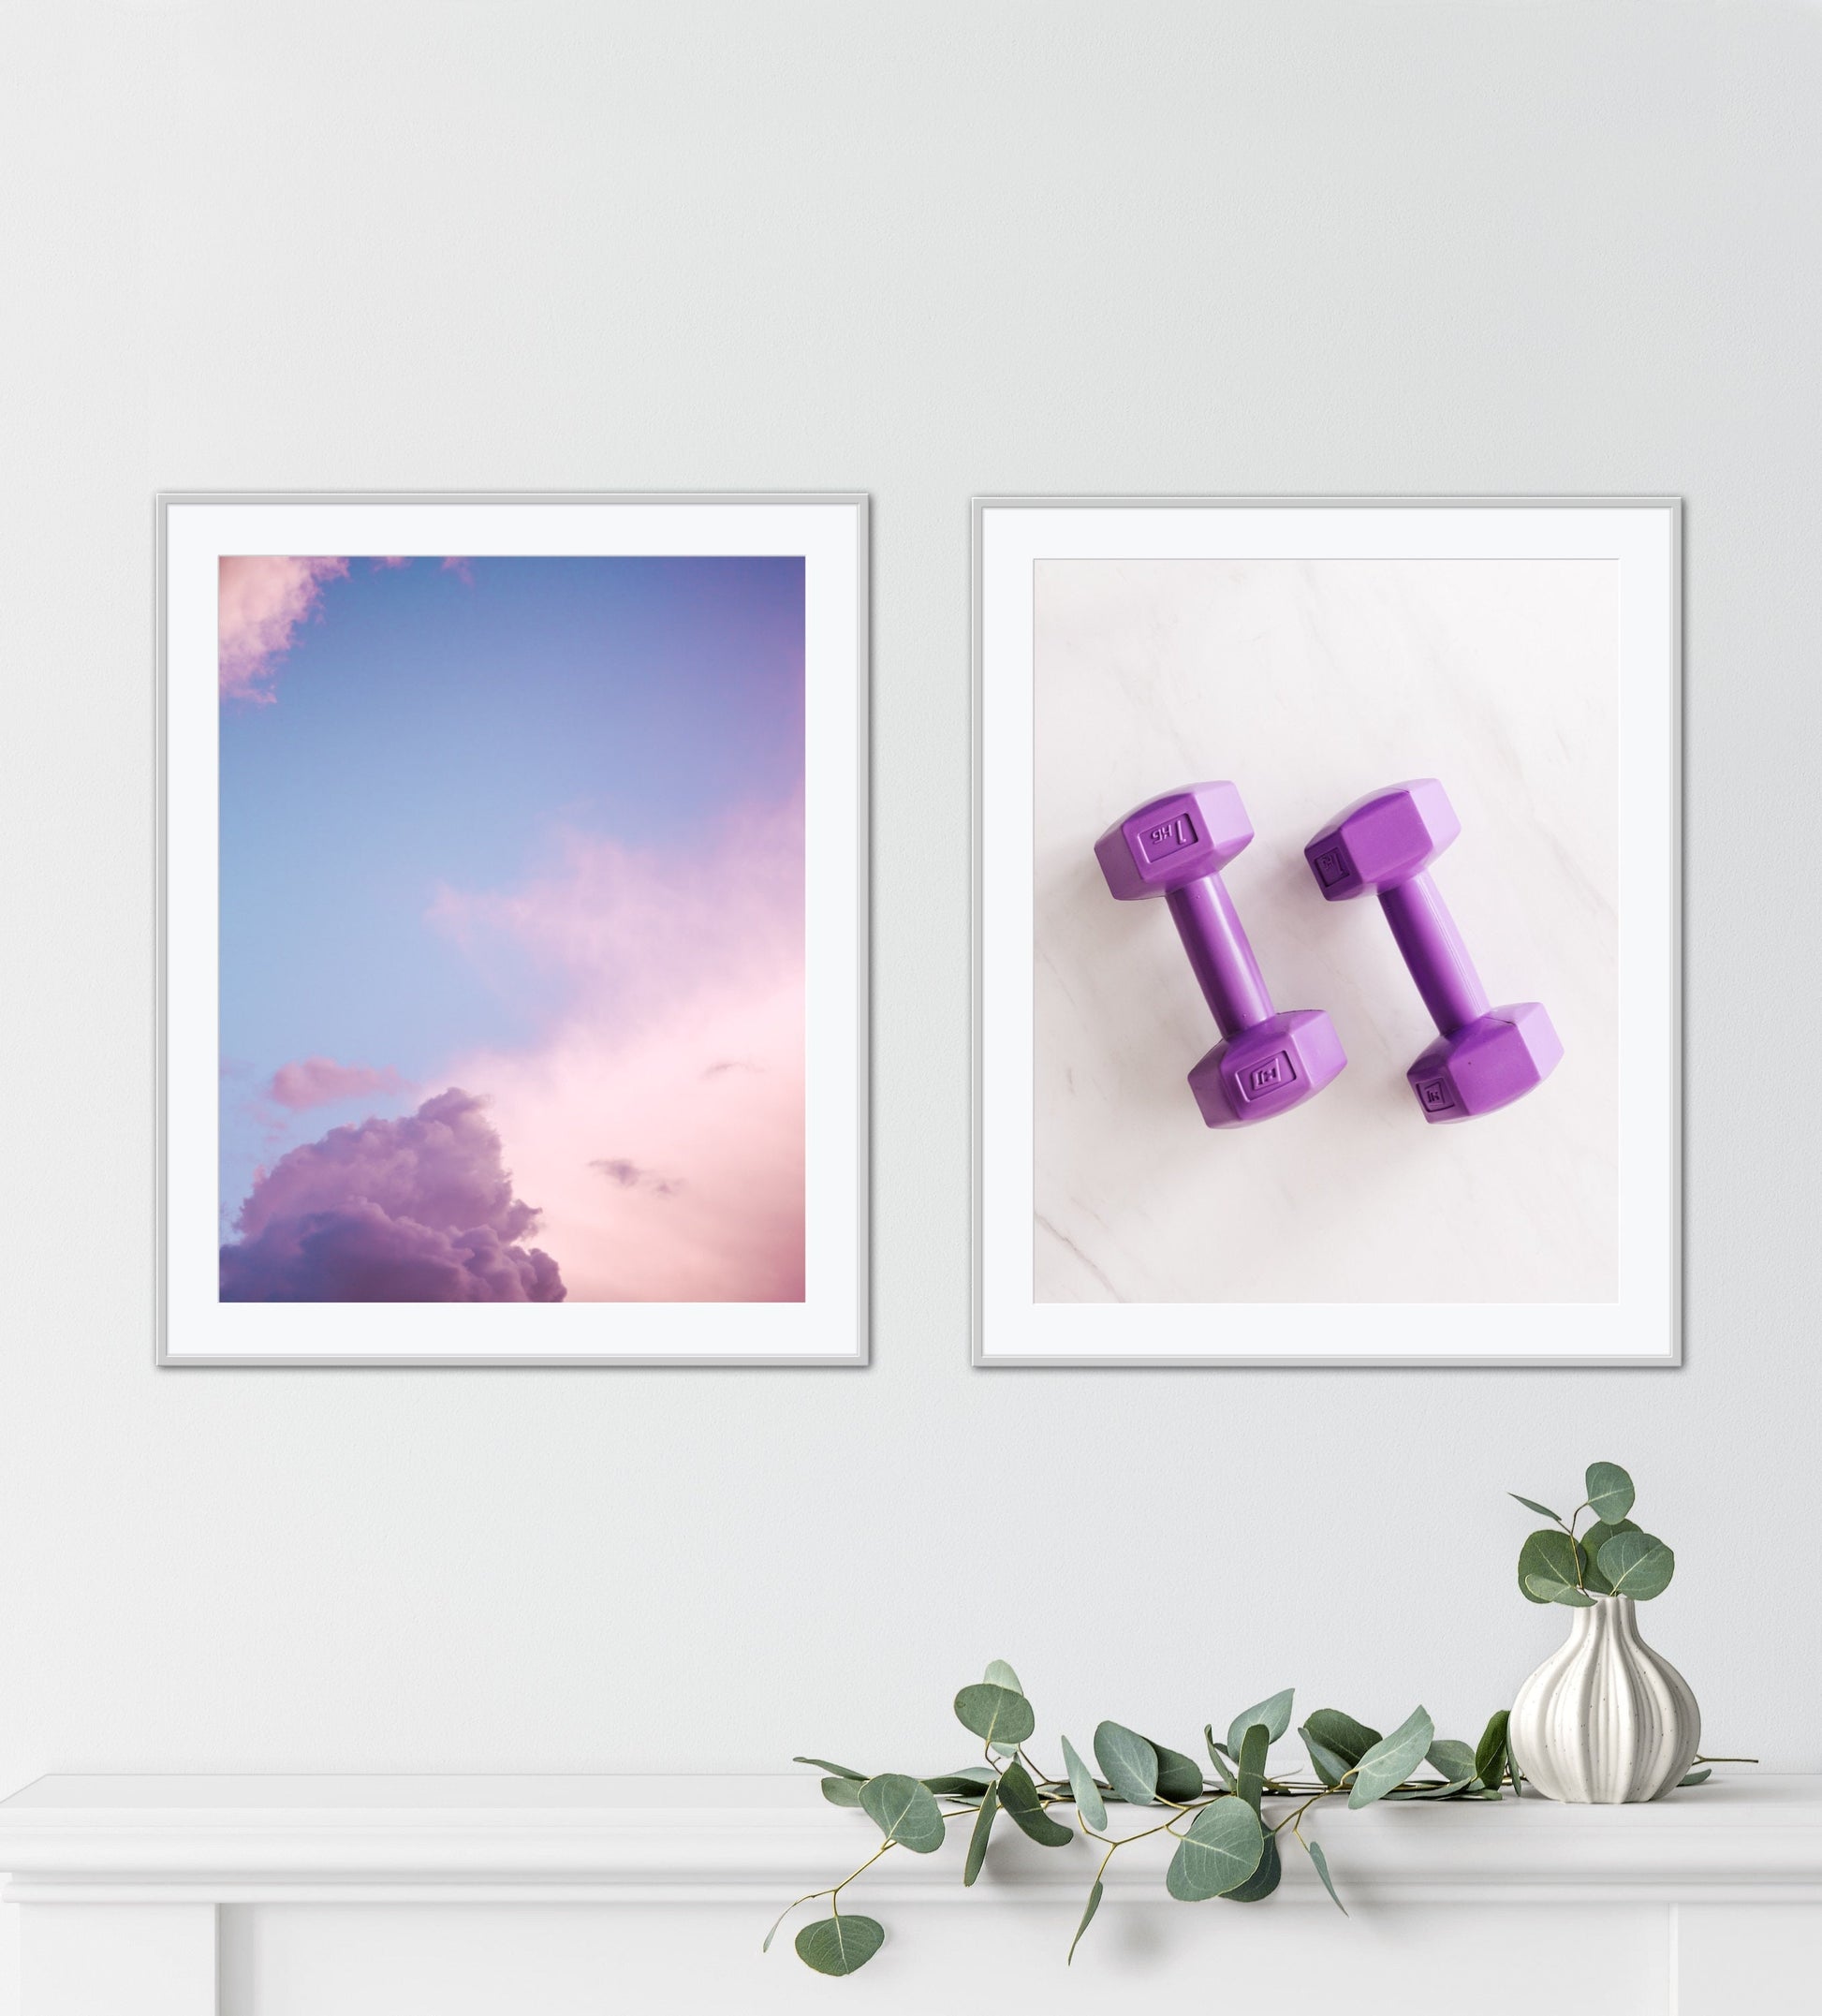 Gym poster Set of 2 workout décor INSTANT DOWNLOAD, sport wall art, lavender wall art, sports aesthetic, gym weights, sky printable